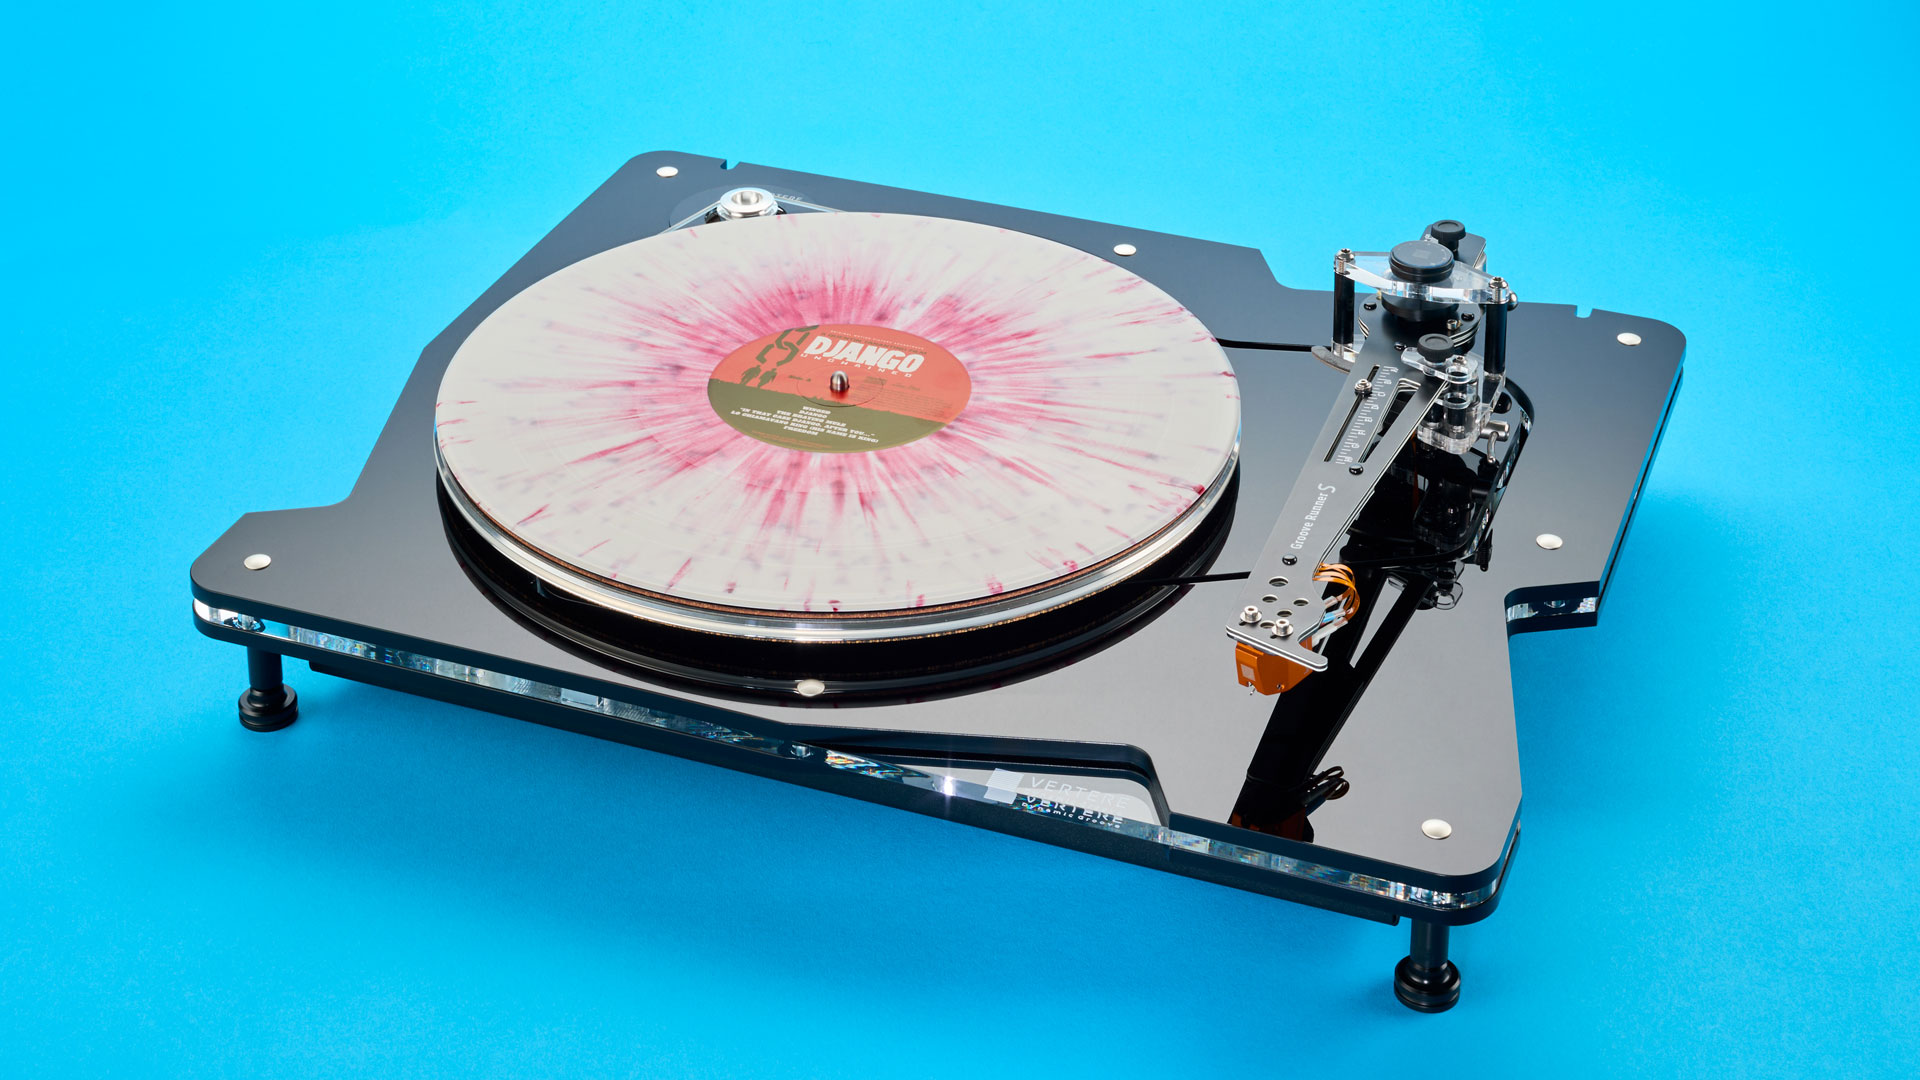 The new DG-1 S from Vertere including tonearm and cartridge (Image Credit: Vertere)